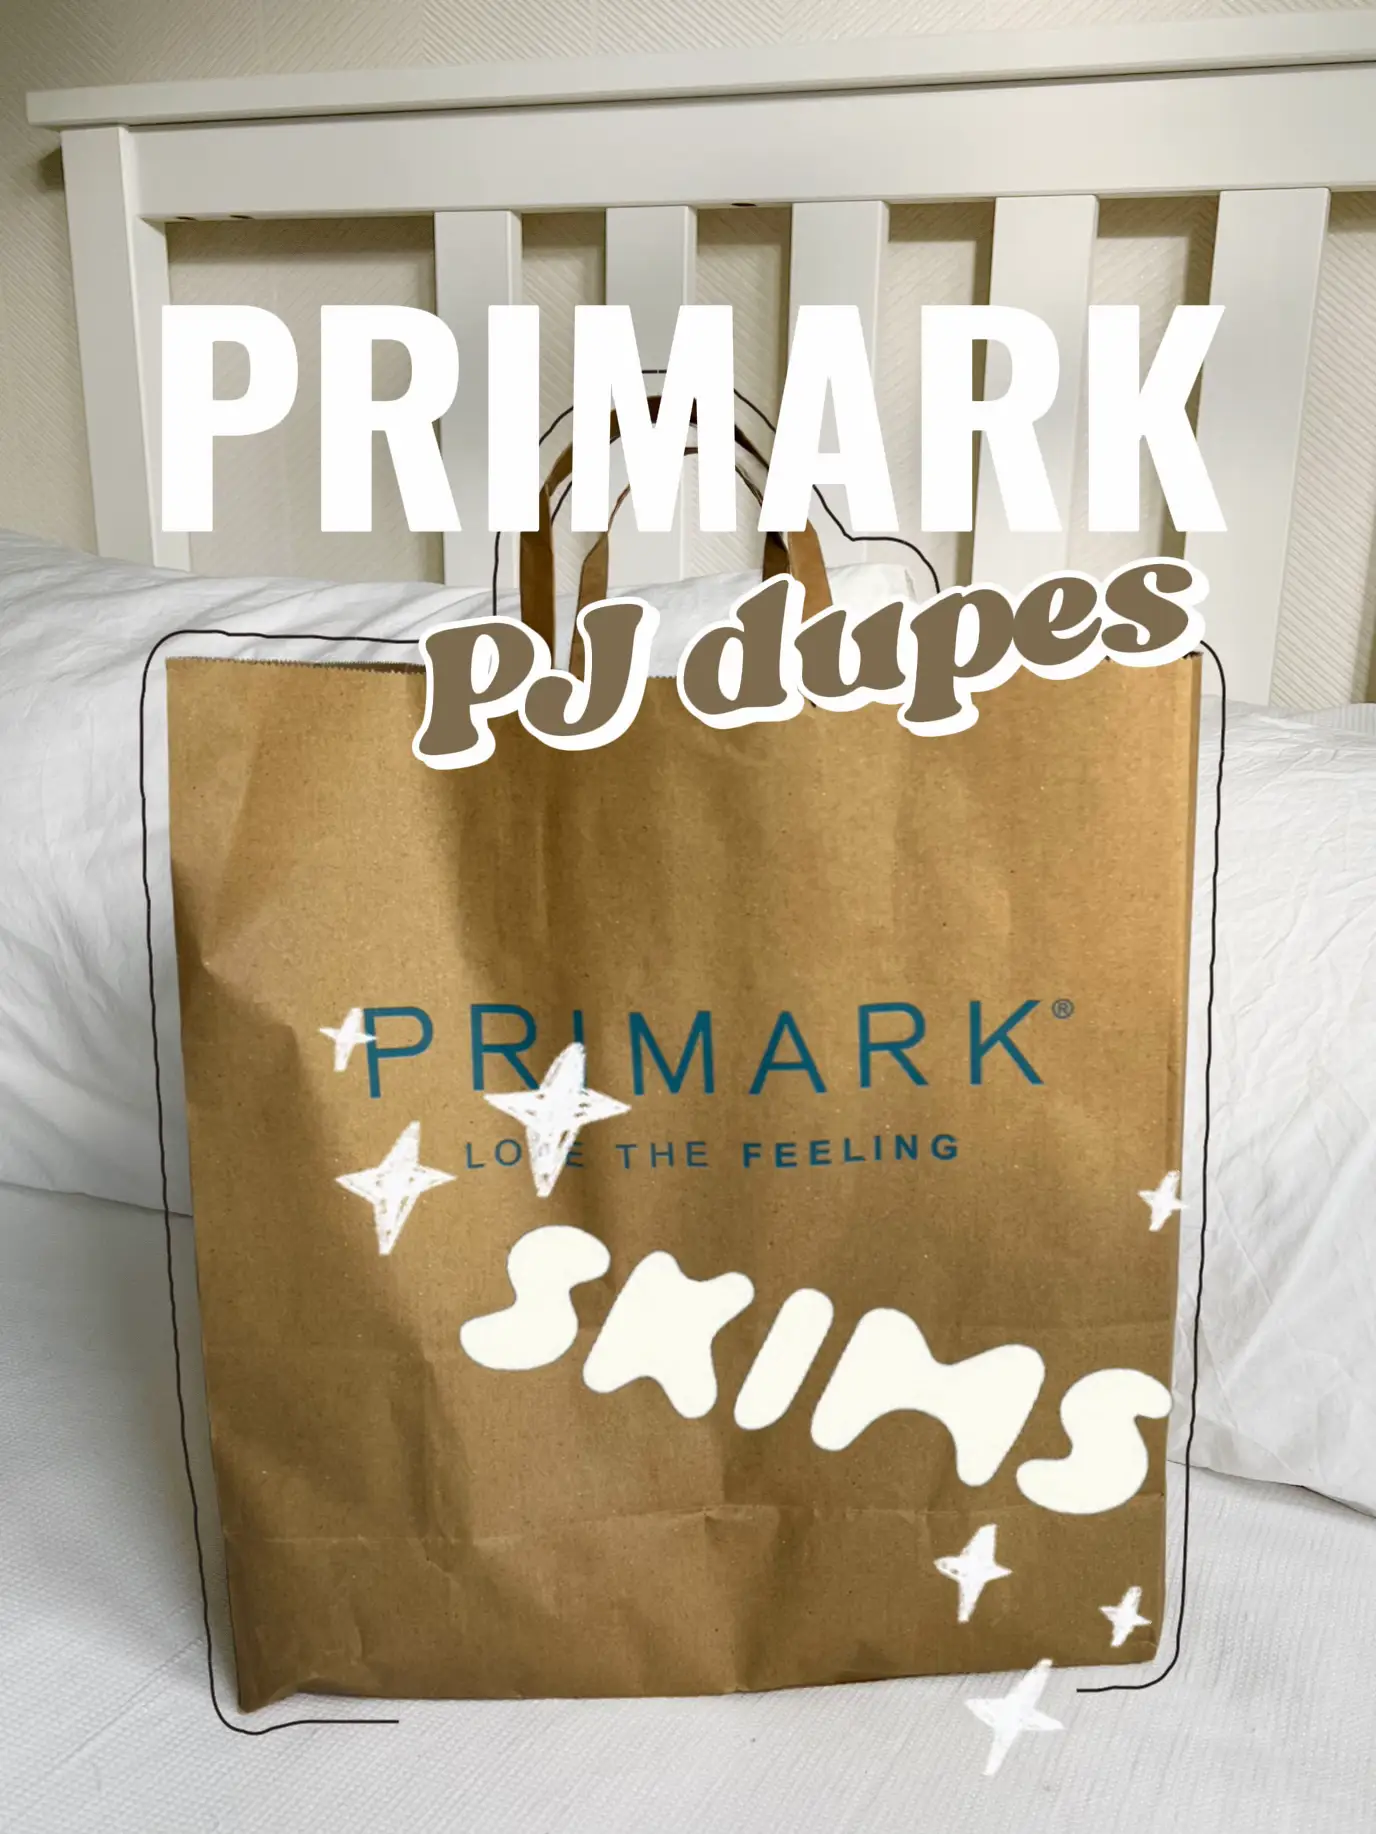 I tried the £8 Skims dupe bodysuits from Primark - they're perfect & make  me looked so snatched